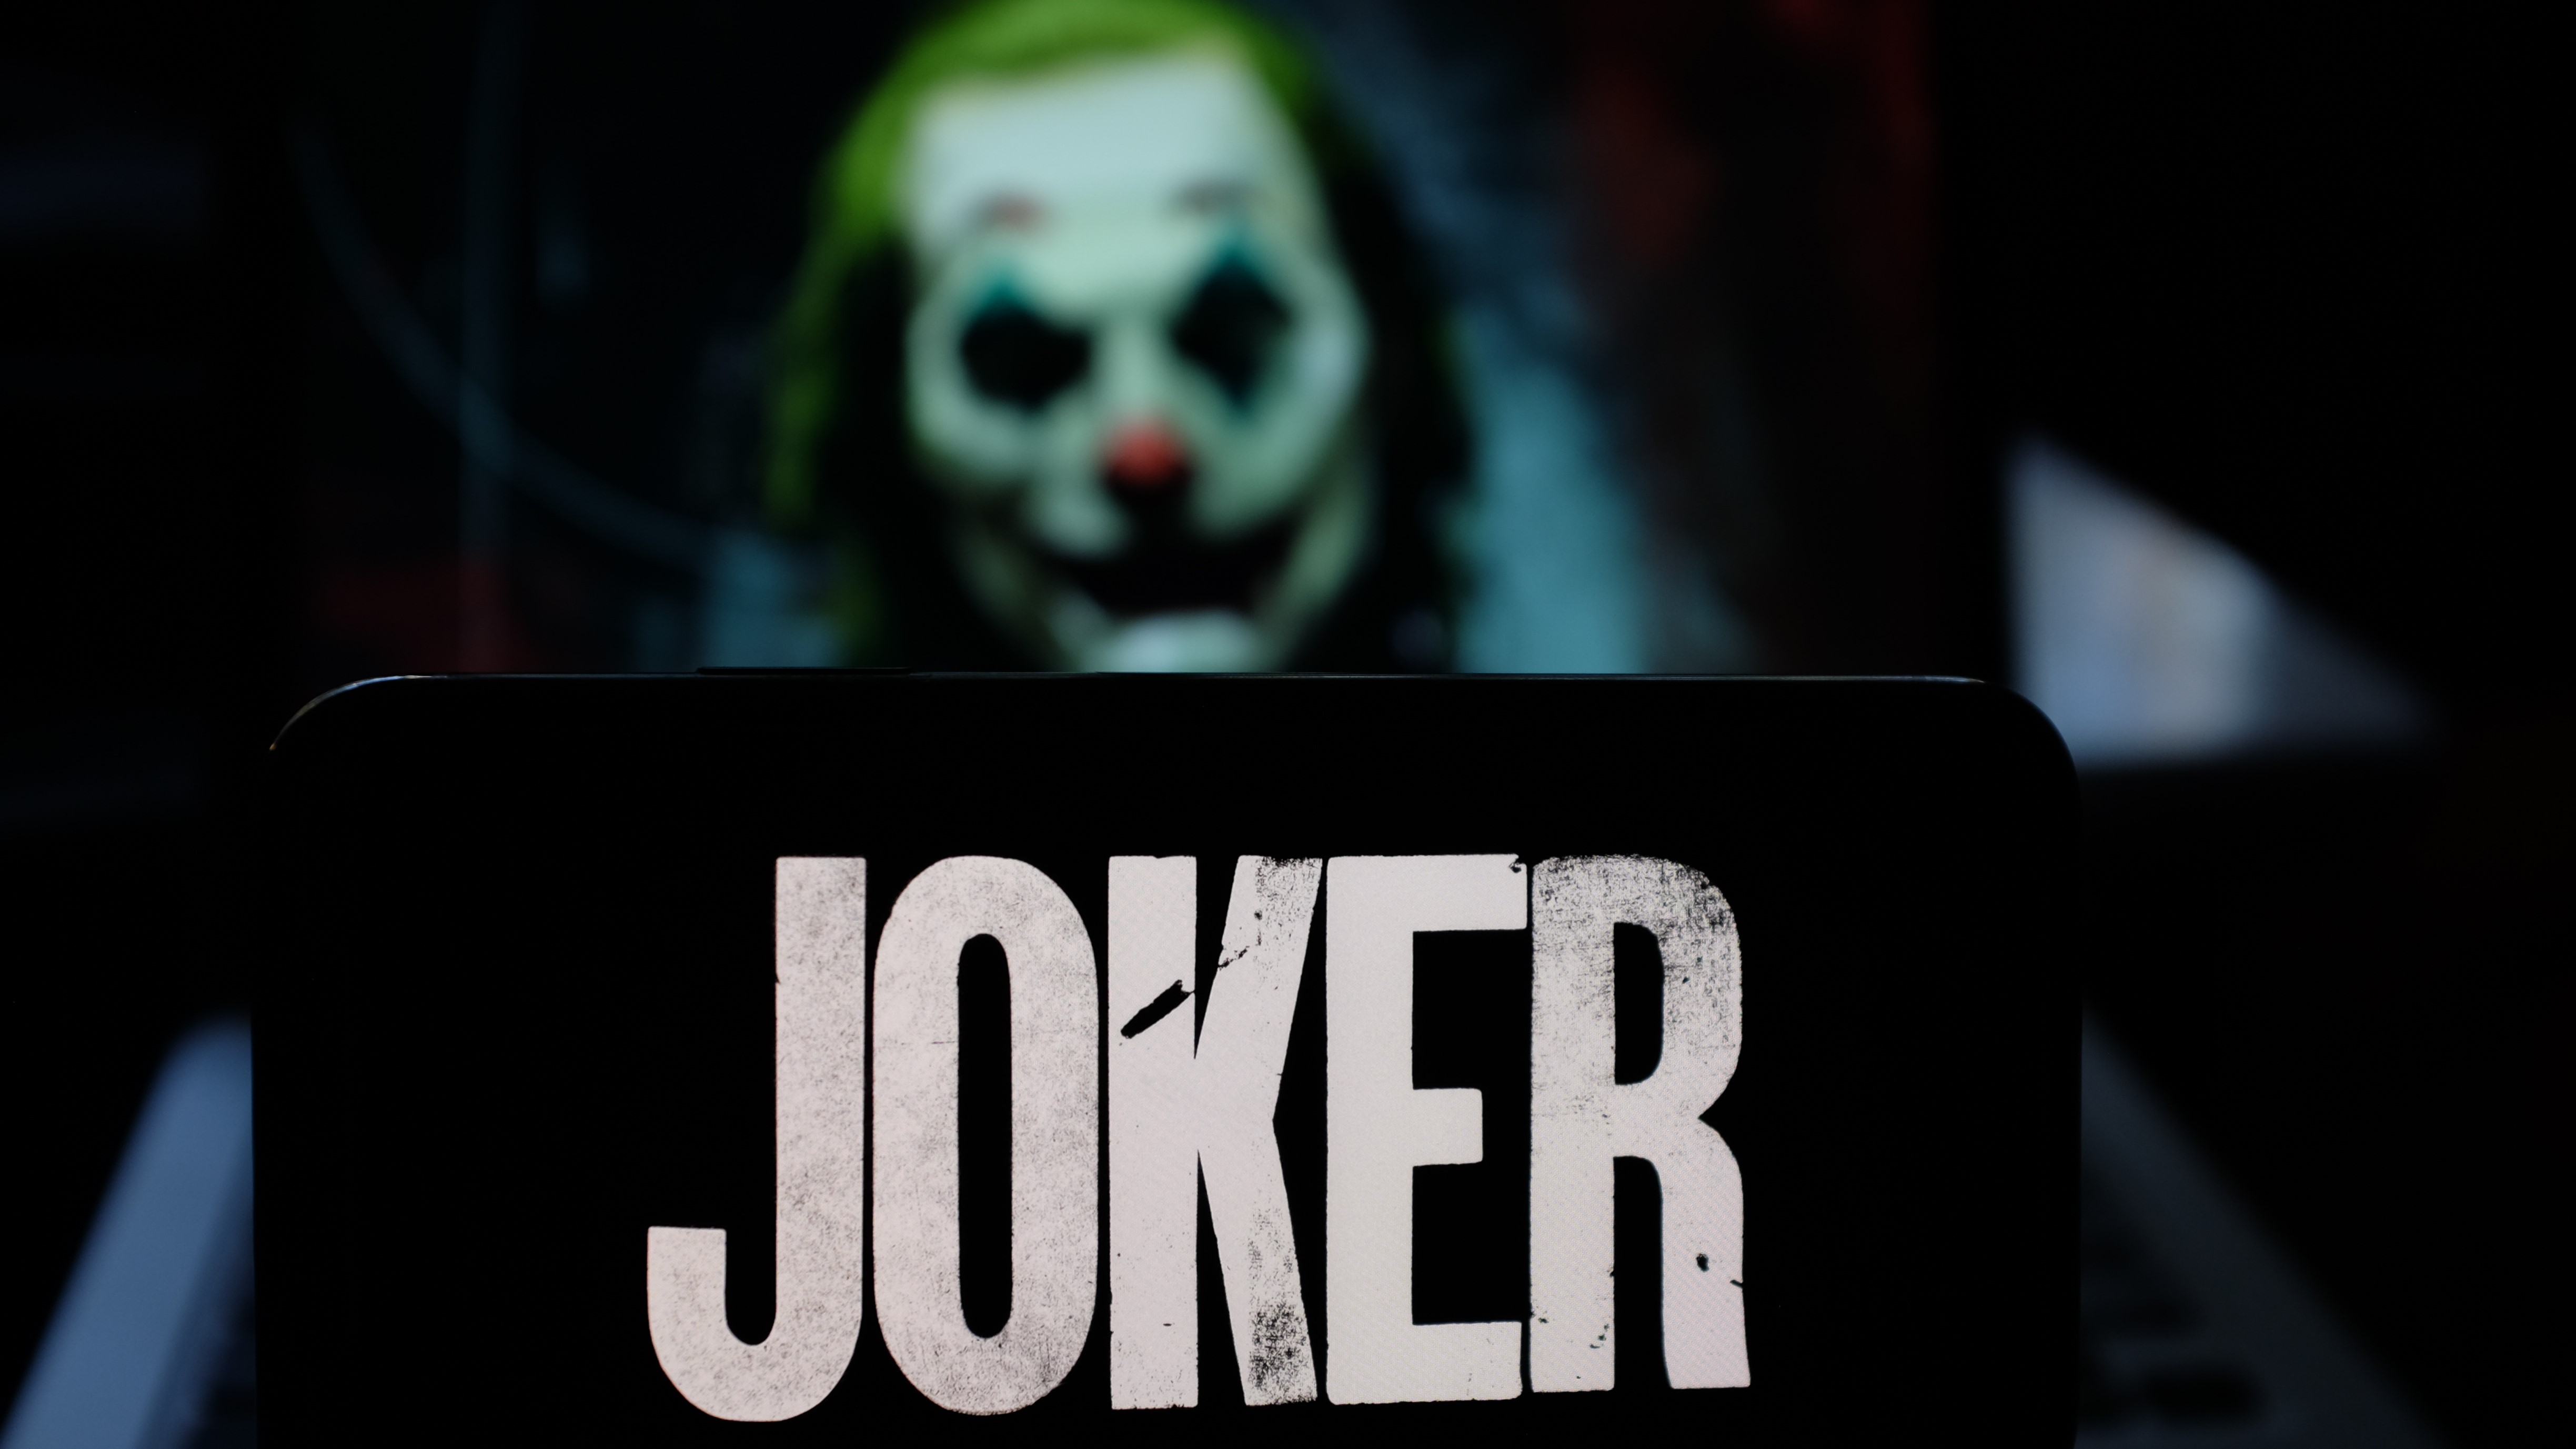 A picture of the Joker depicting the Joker malware